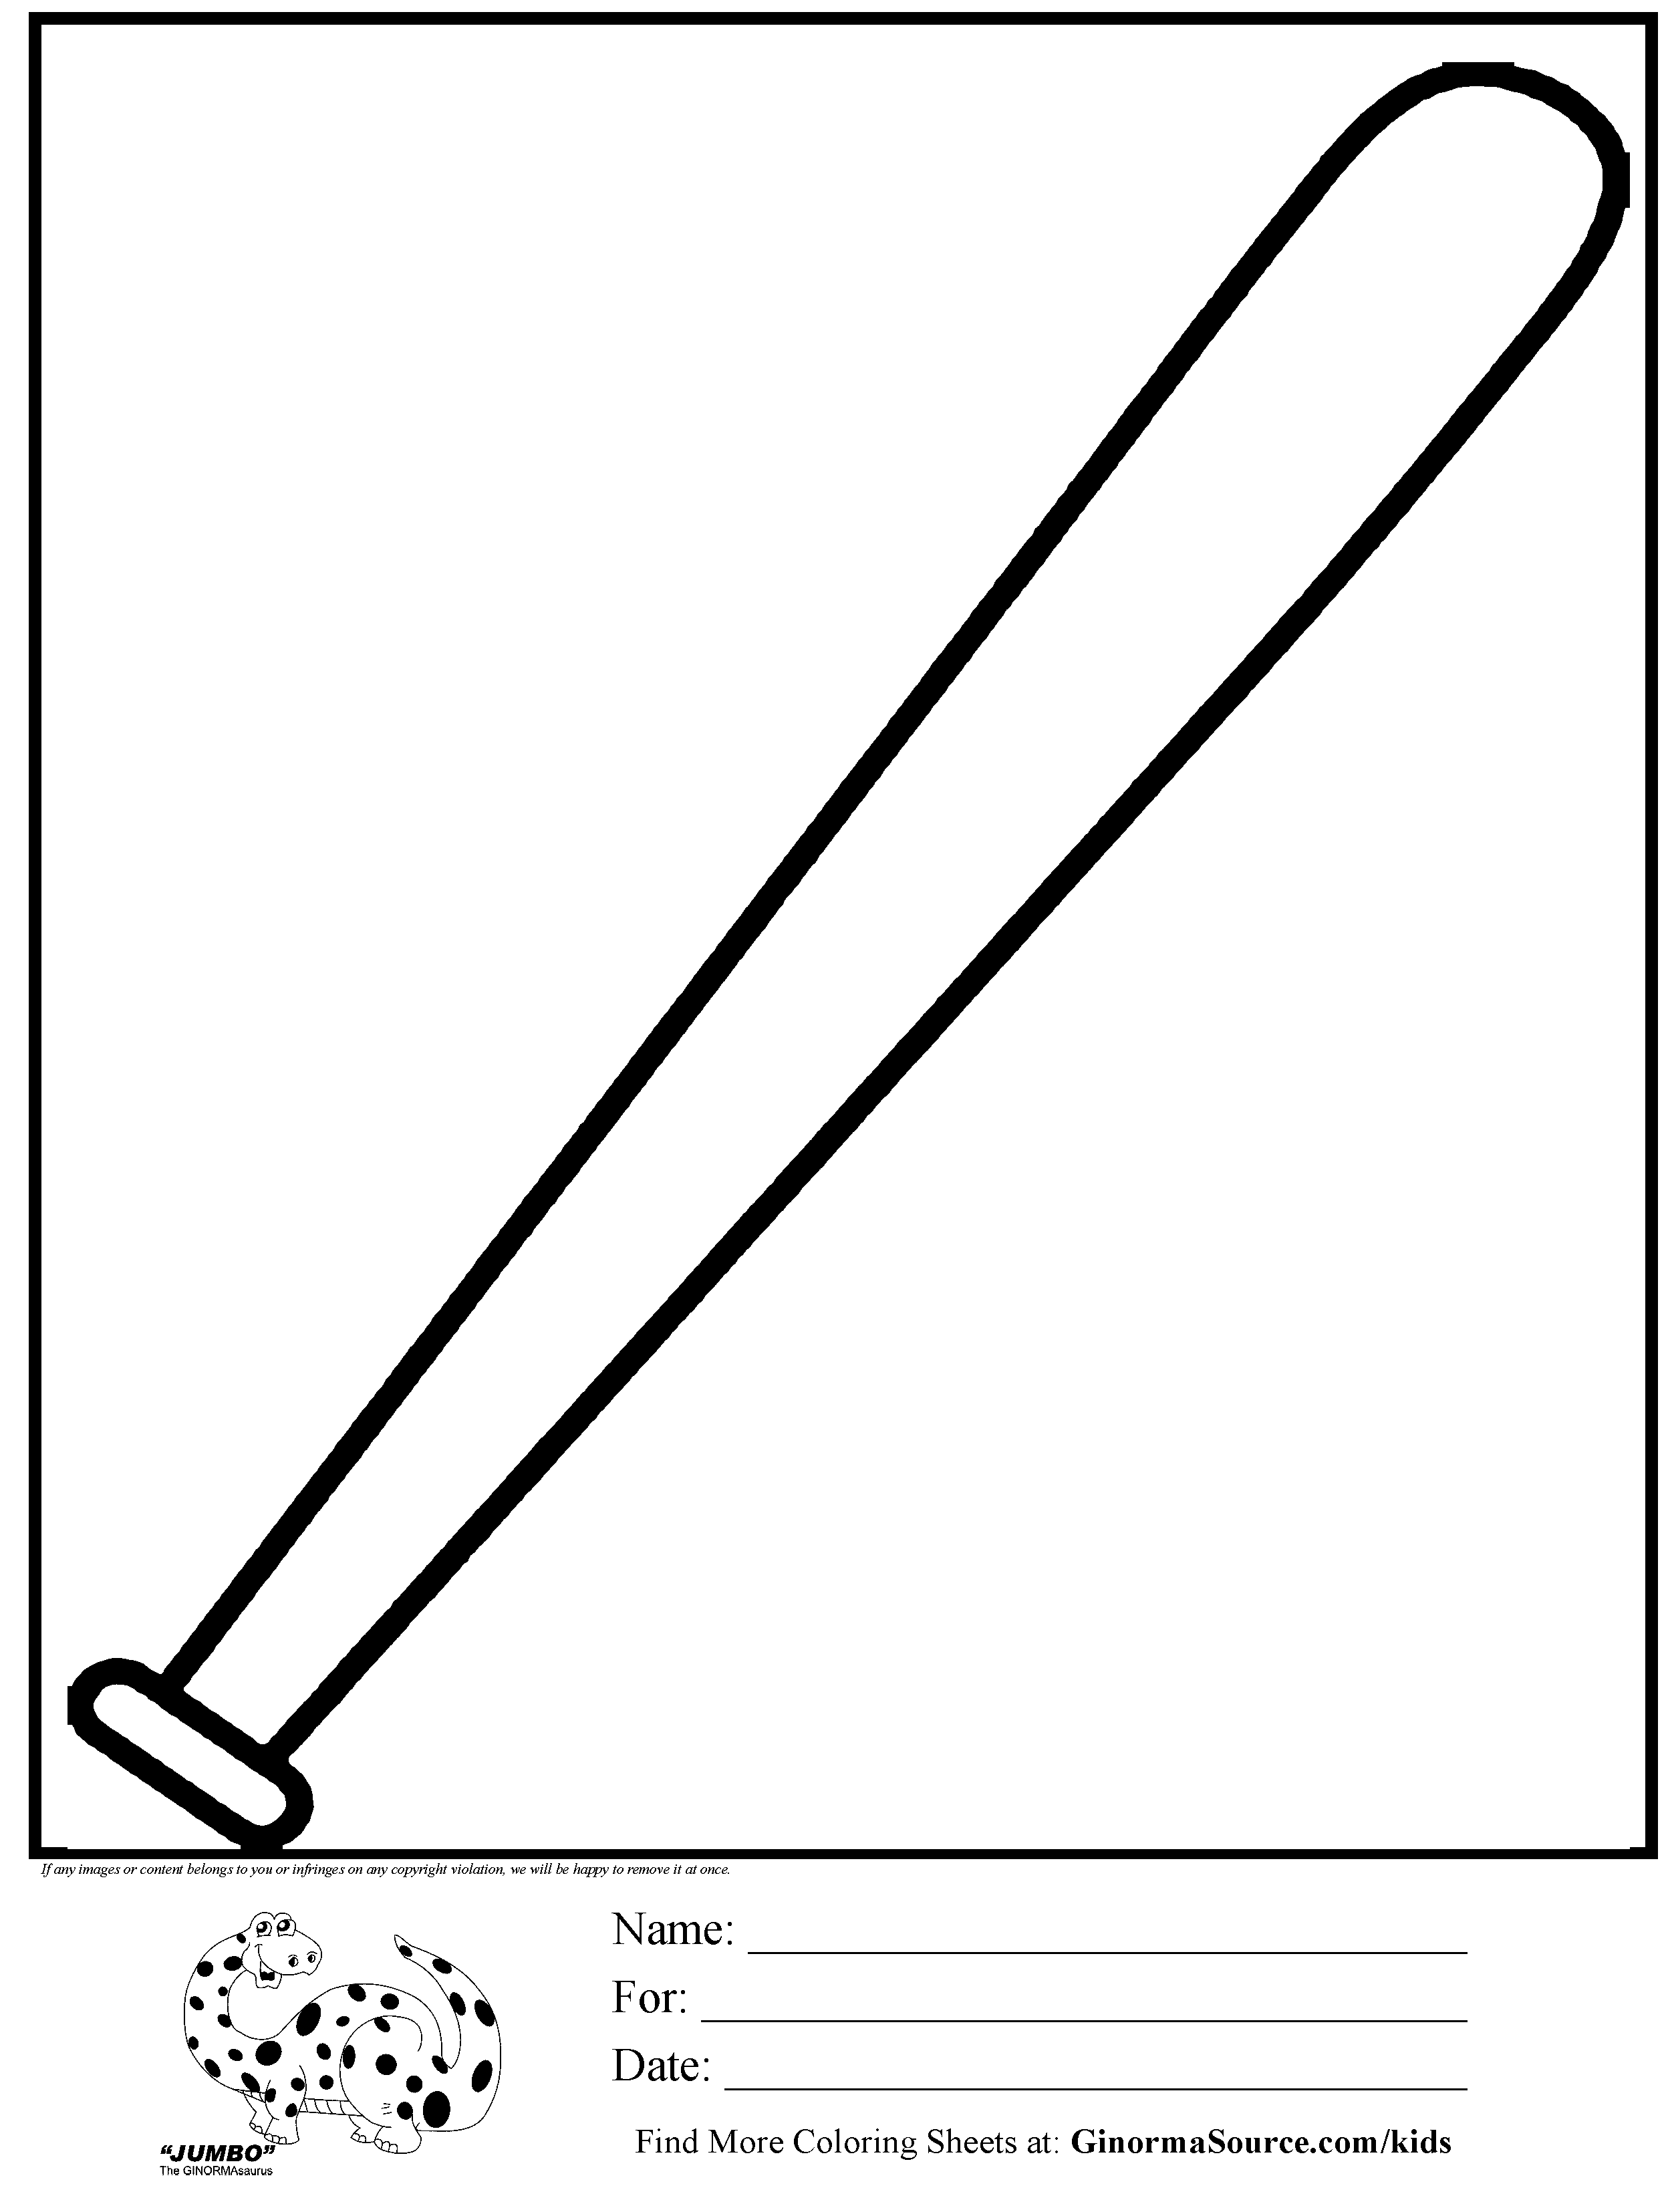 Coloring Page Of Bat And Ball - Coloring Home